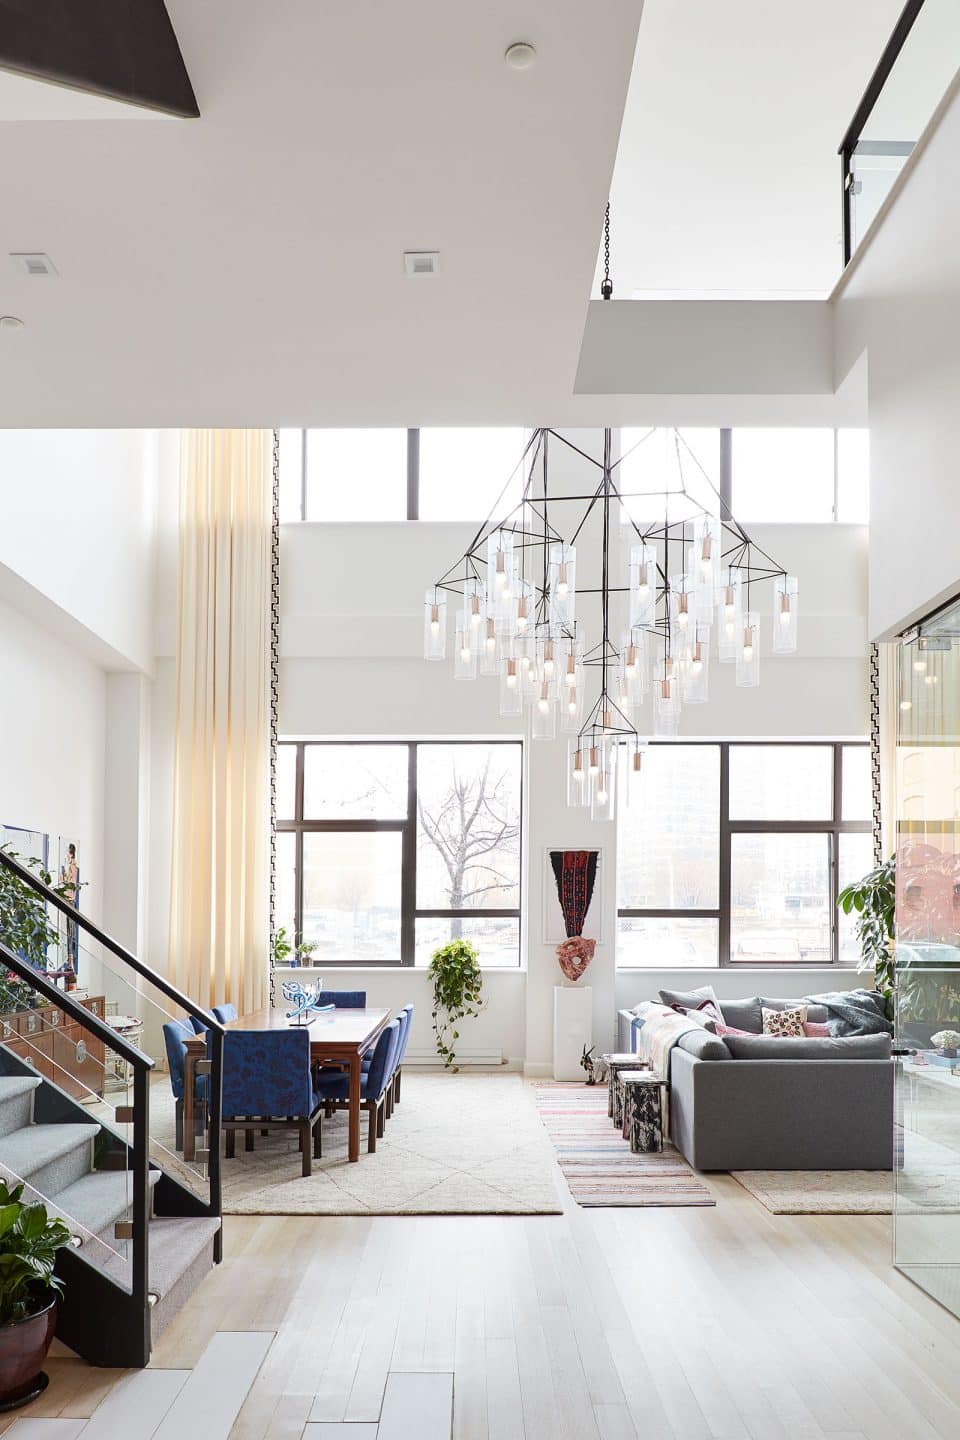 A Brooklyn-Based Designer Prefers the ‘Off Colors’ in a Room